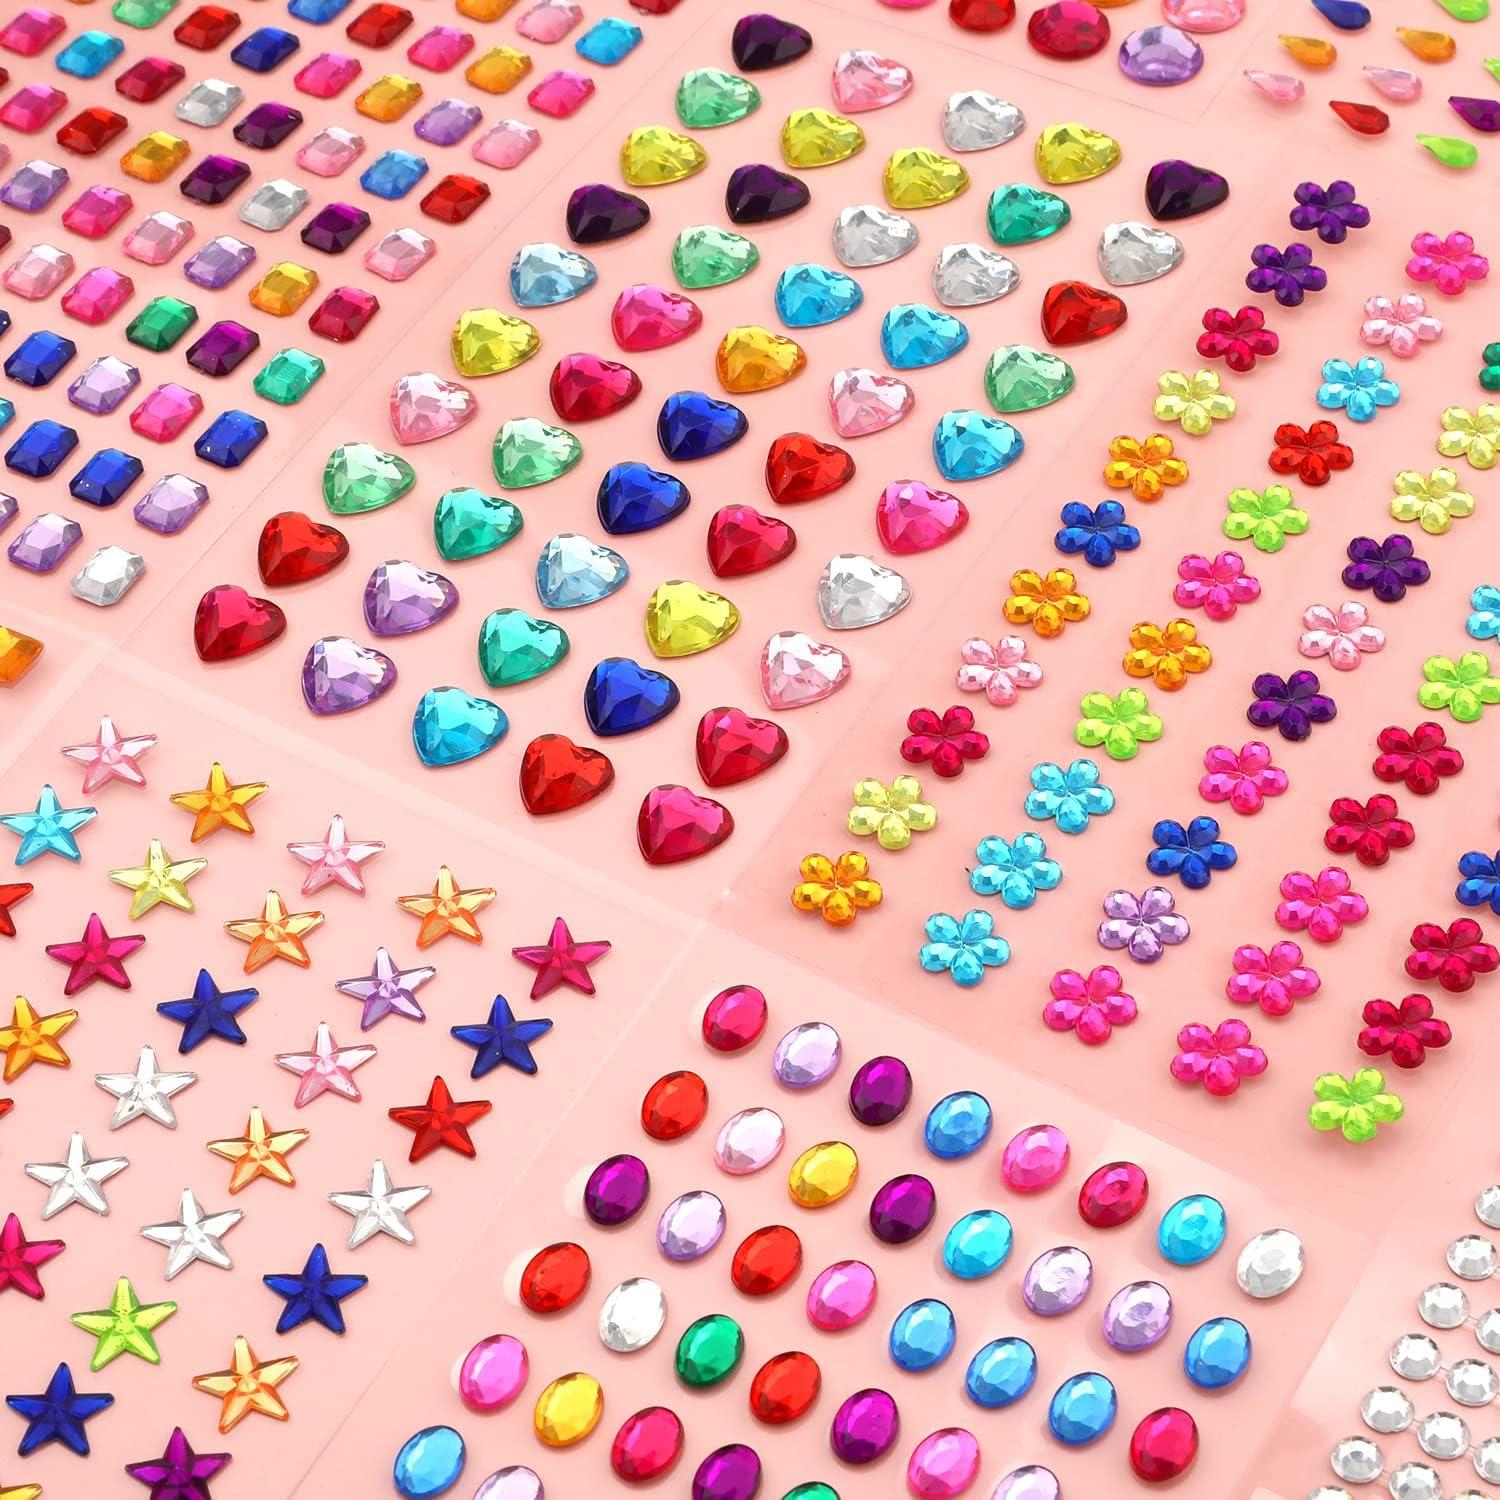 Meafeng Gem Stickers, 14 Colors, Self Adhesive, Bling Rhinestone Jewels,  Stick on Gems for Face Makeup, Body, Nails, Festivals, Crafts, Weddings